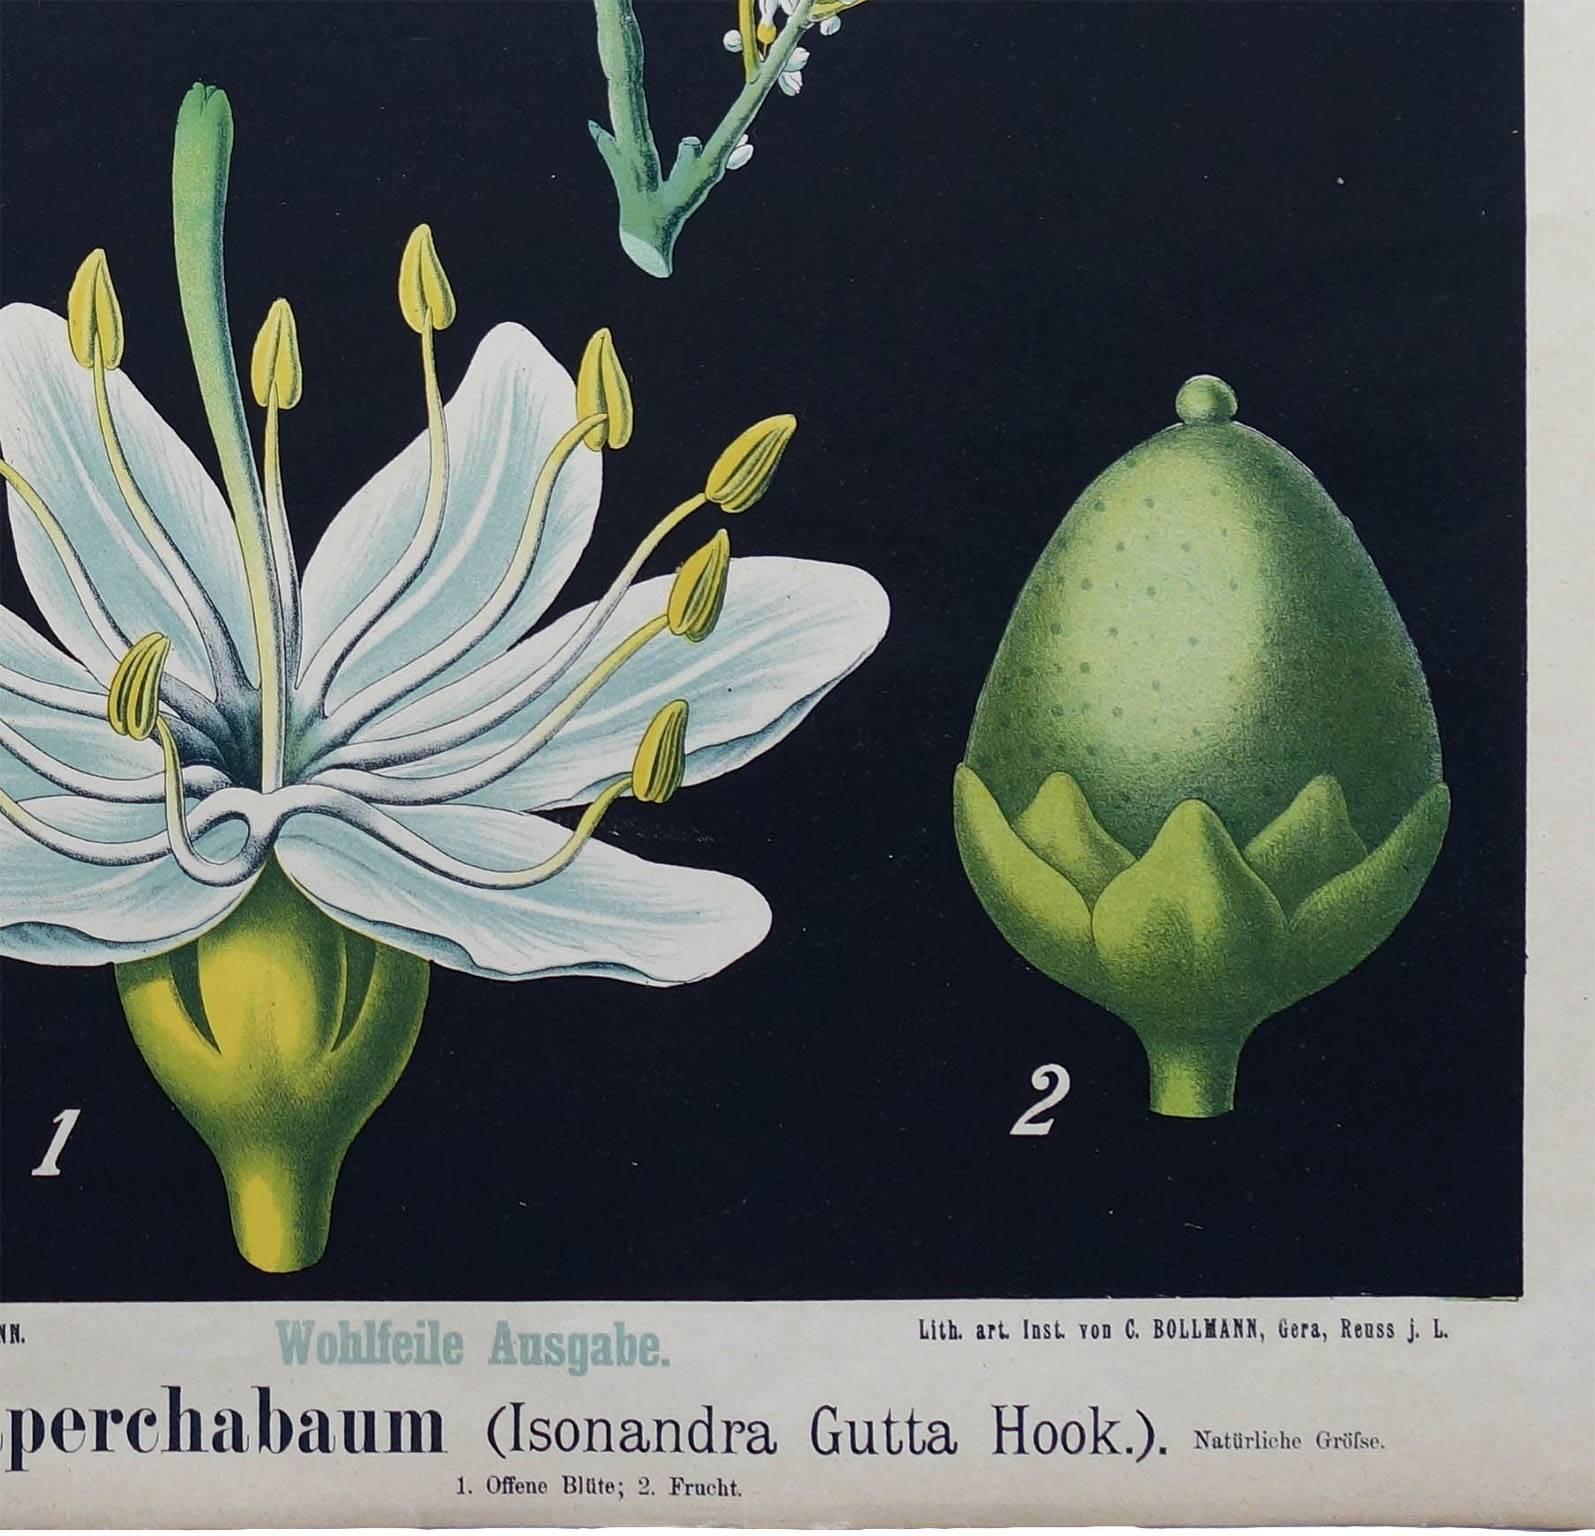 19th century German wall chart of a rubber tree and a Guttapercha plant. Chromolithograph on paper by Zippel & Bollmann.

Between 1876 and 1899, the German Botanist Hermann Zippel and illustrator Carl Bollmann produced a large number of